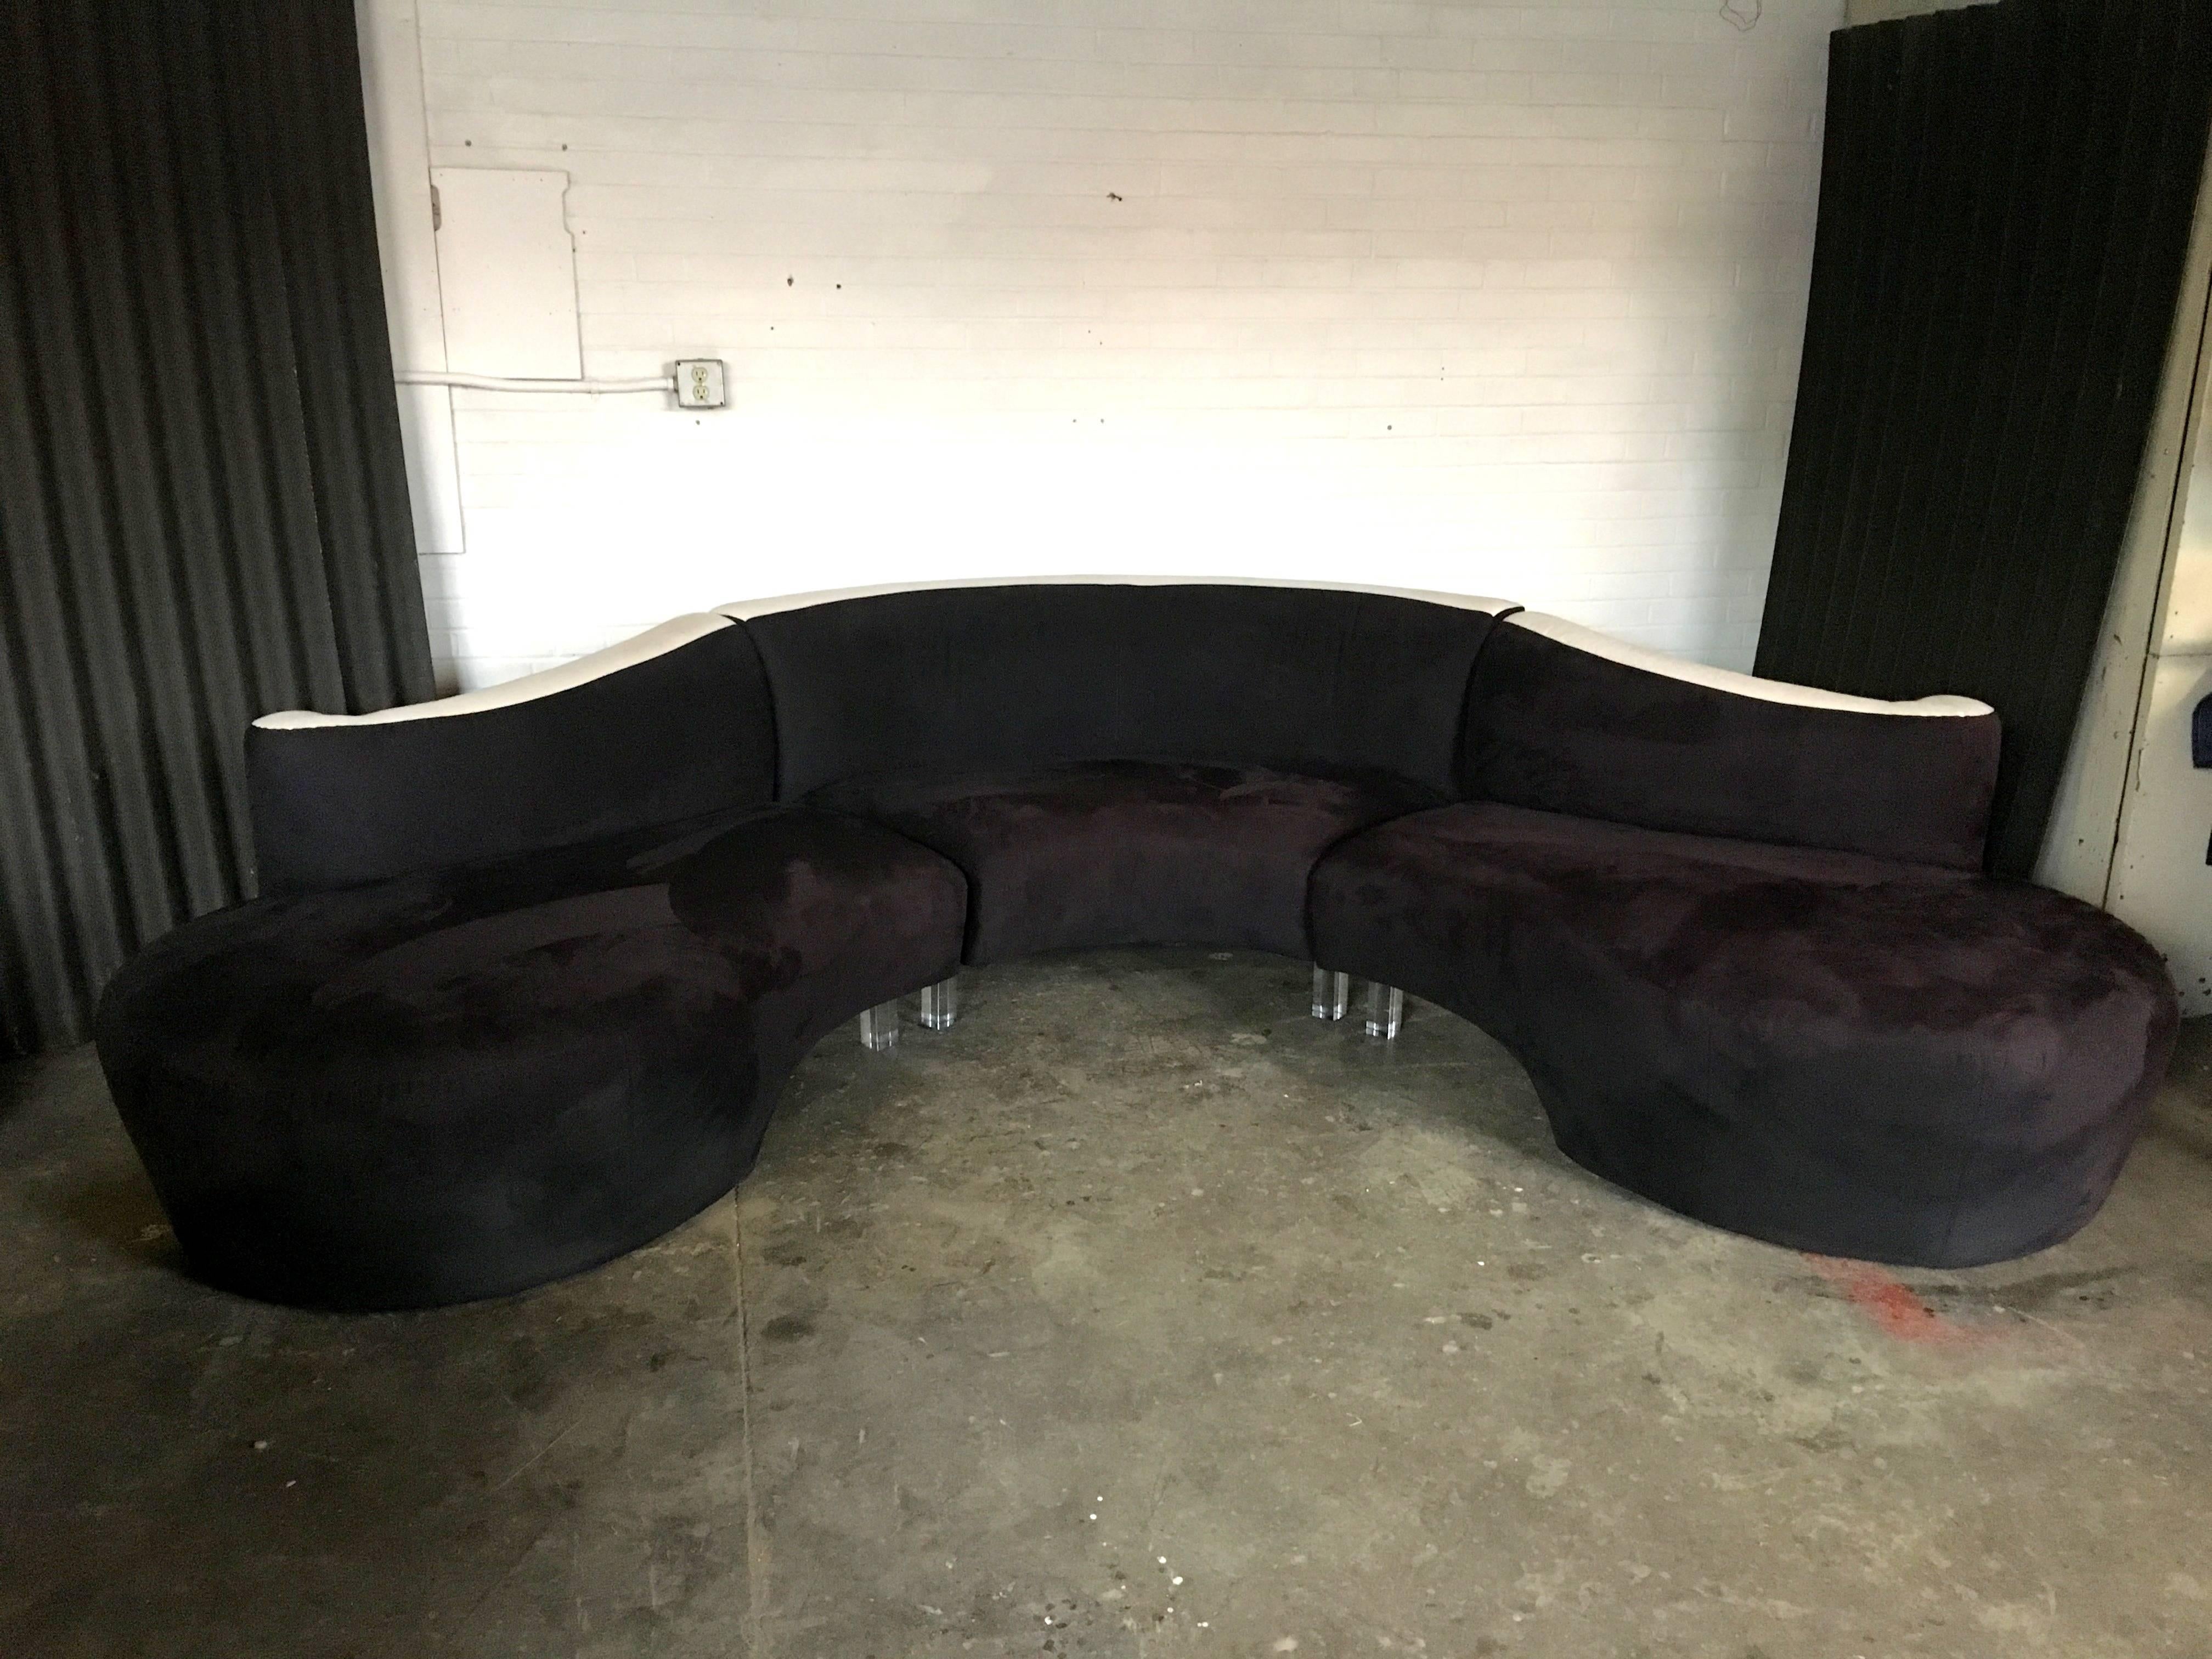 Flawless and Delicious. three-piece Serpentine sofa/sectional with Lucite Legs in the most incredible condition. A piece like this doesn't come around often and, when it does, never in this condition.
Ultra suede material in black and ivory.